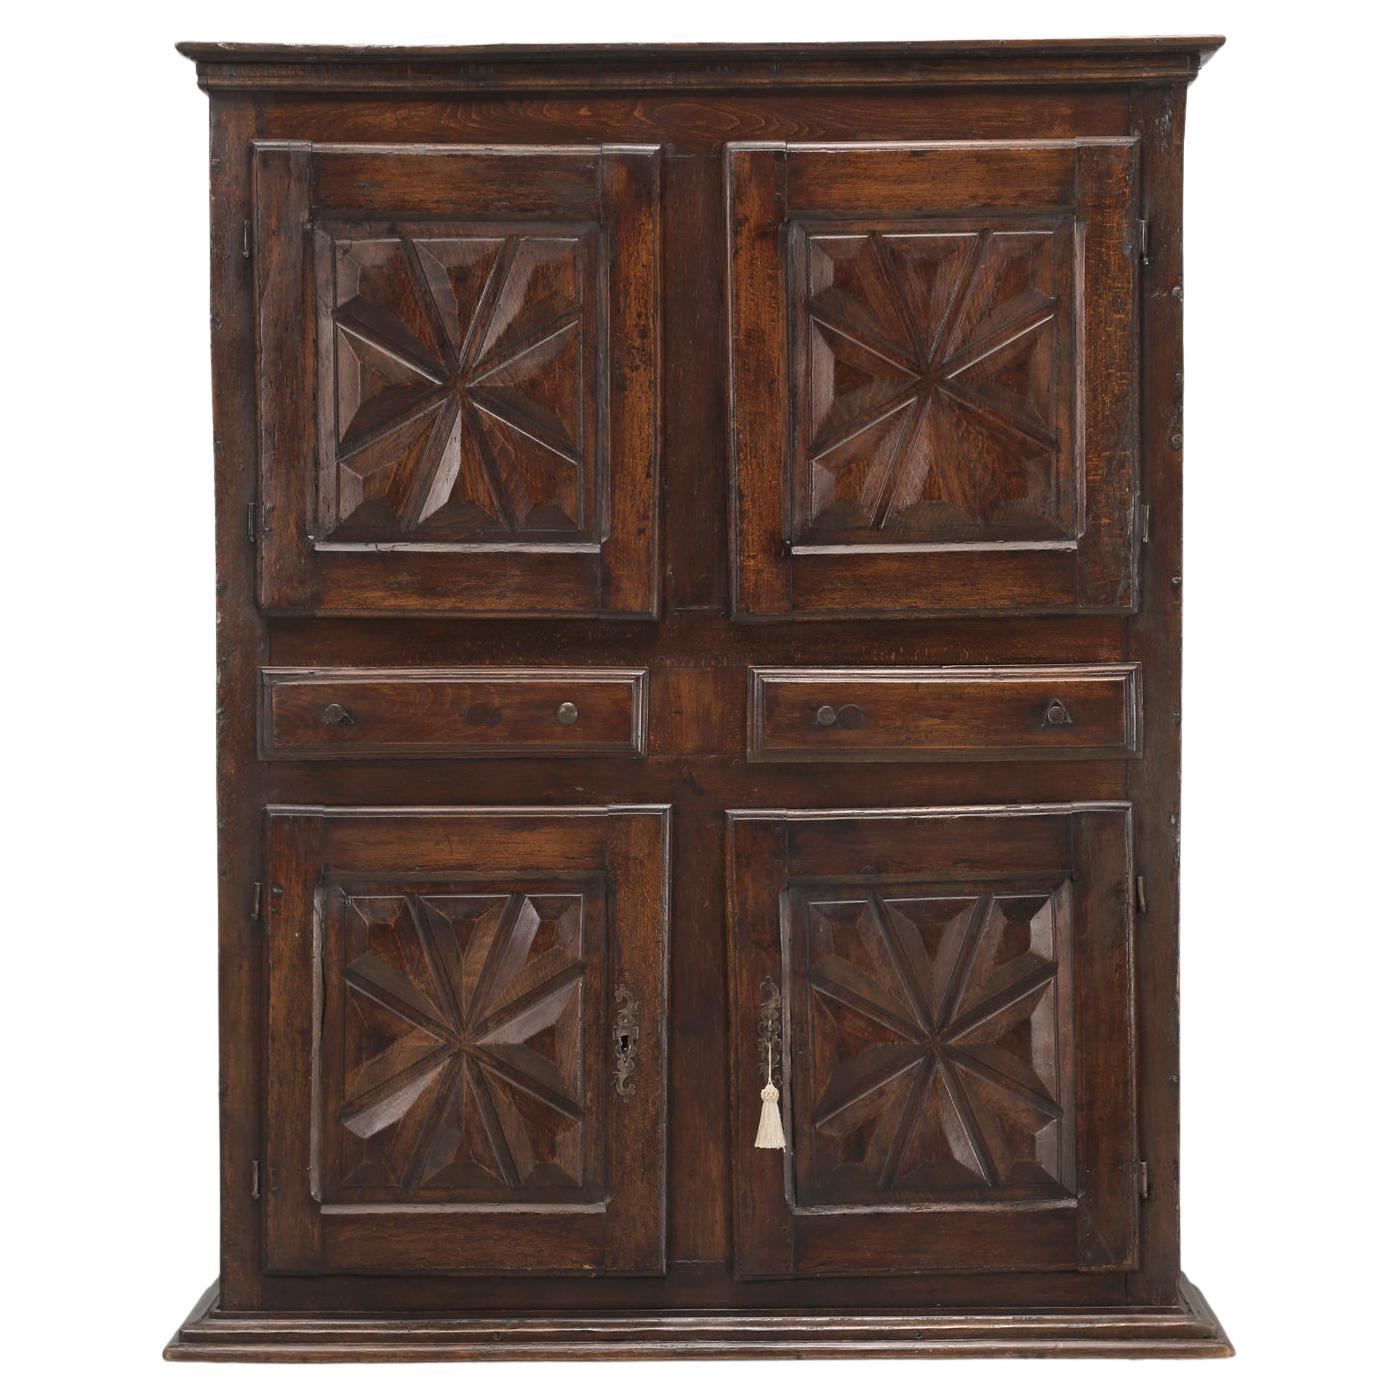 Antique French Louis XIII Armoire or Cupboard from the Early 1700's